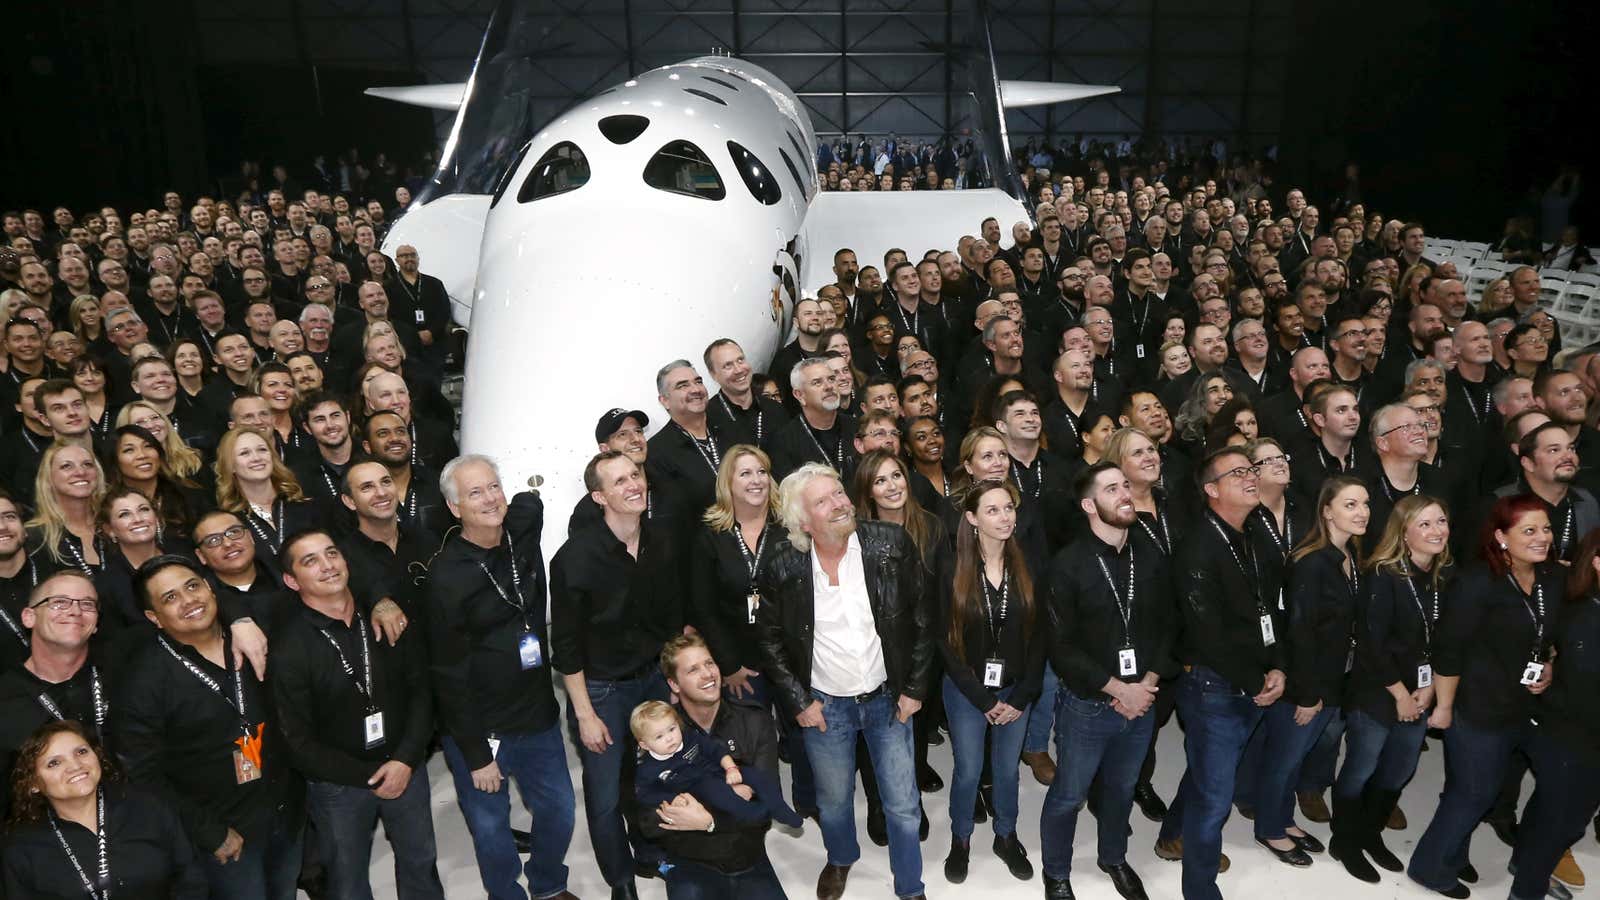 Branson and company look to the future in this 2016 photo.